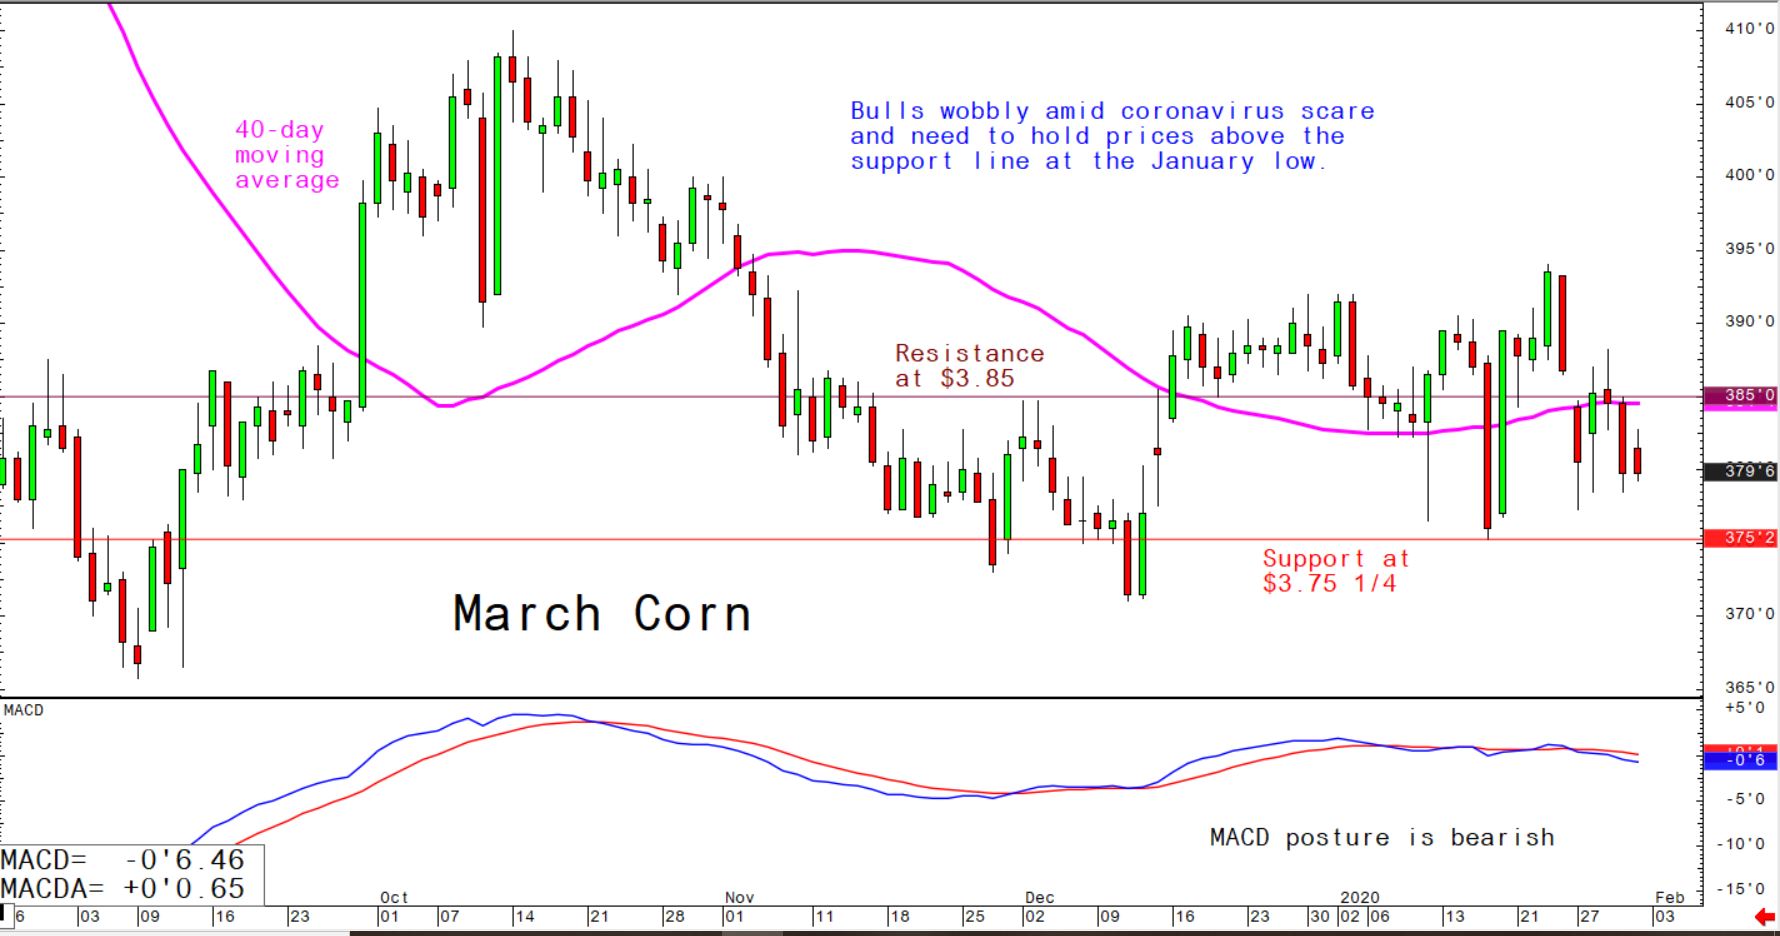 Bulls wobbly amid coronavirus scare and need to hold prices above the support line at the January low